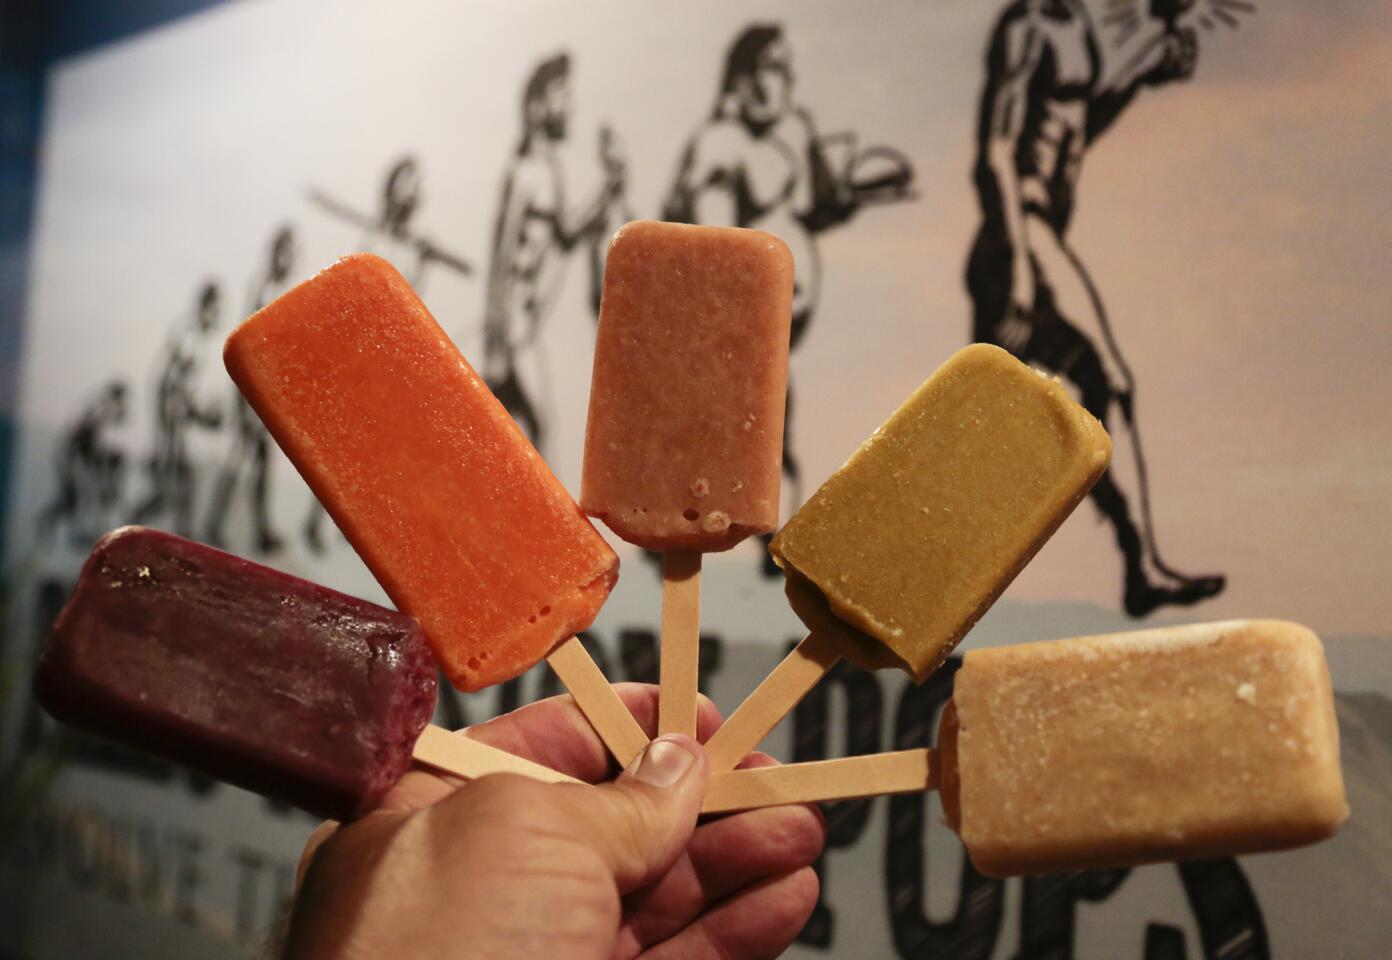 Paleo Passion Pops come in several flavors for those on the paleo diets.